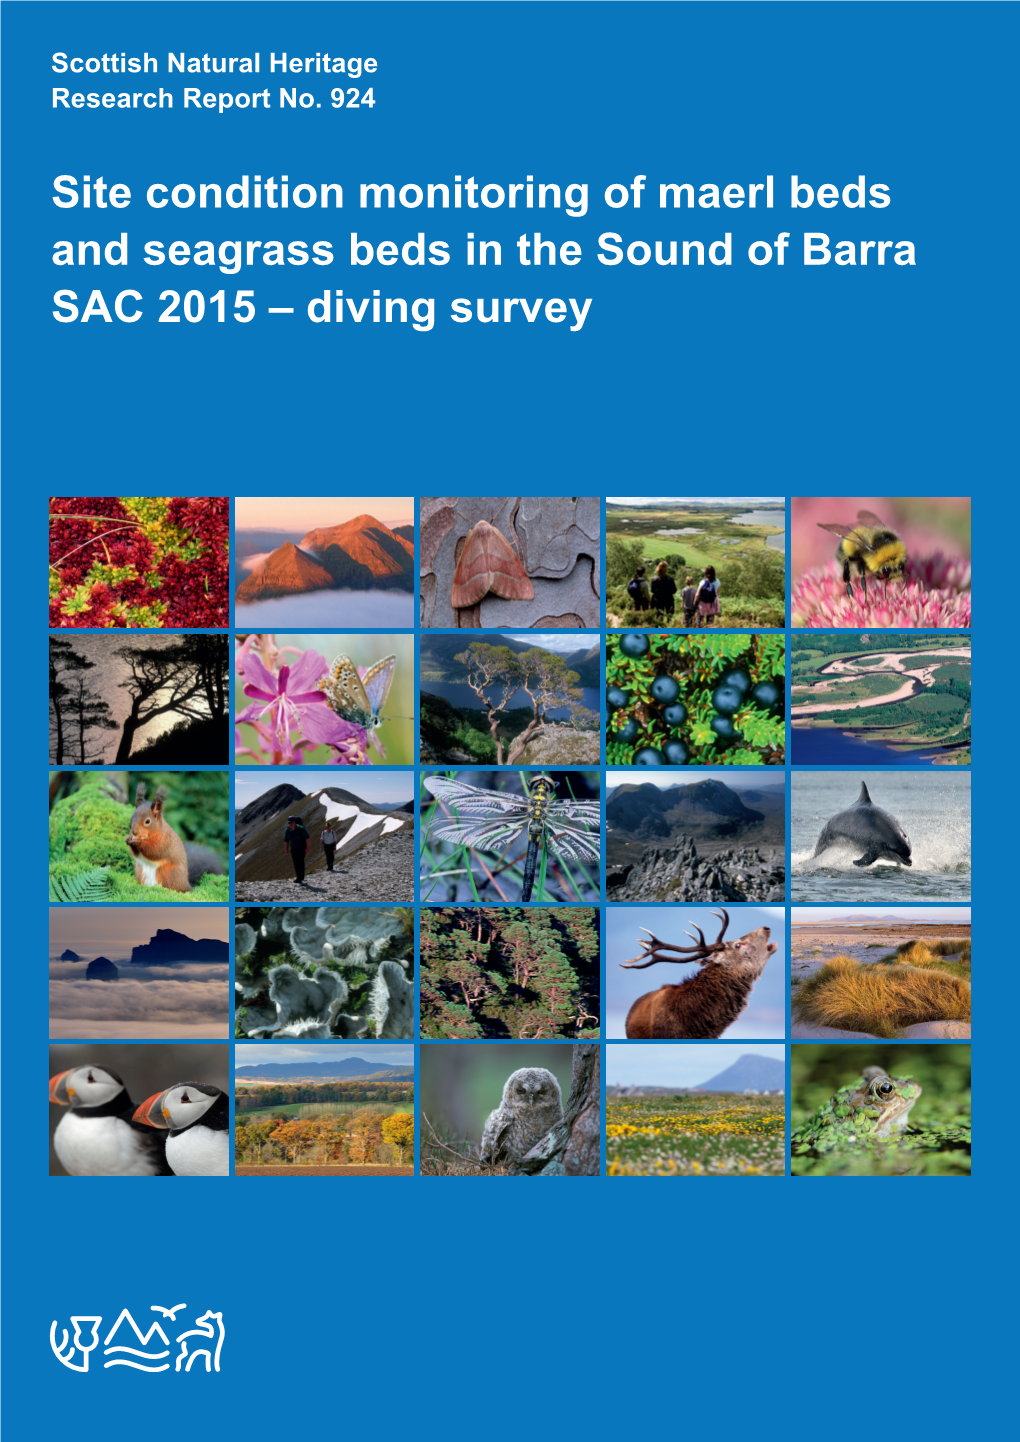 Site Condition Monitoring of Maerl Beds and Seagrass Beds in the Sound of Barra SAC 2015 – Diving Survey